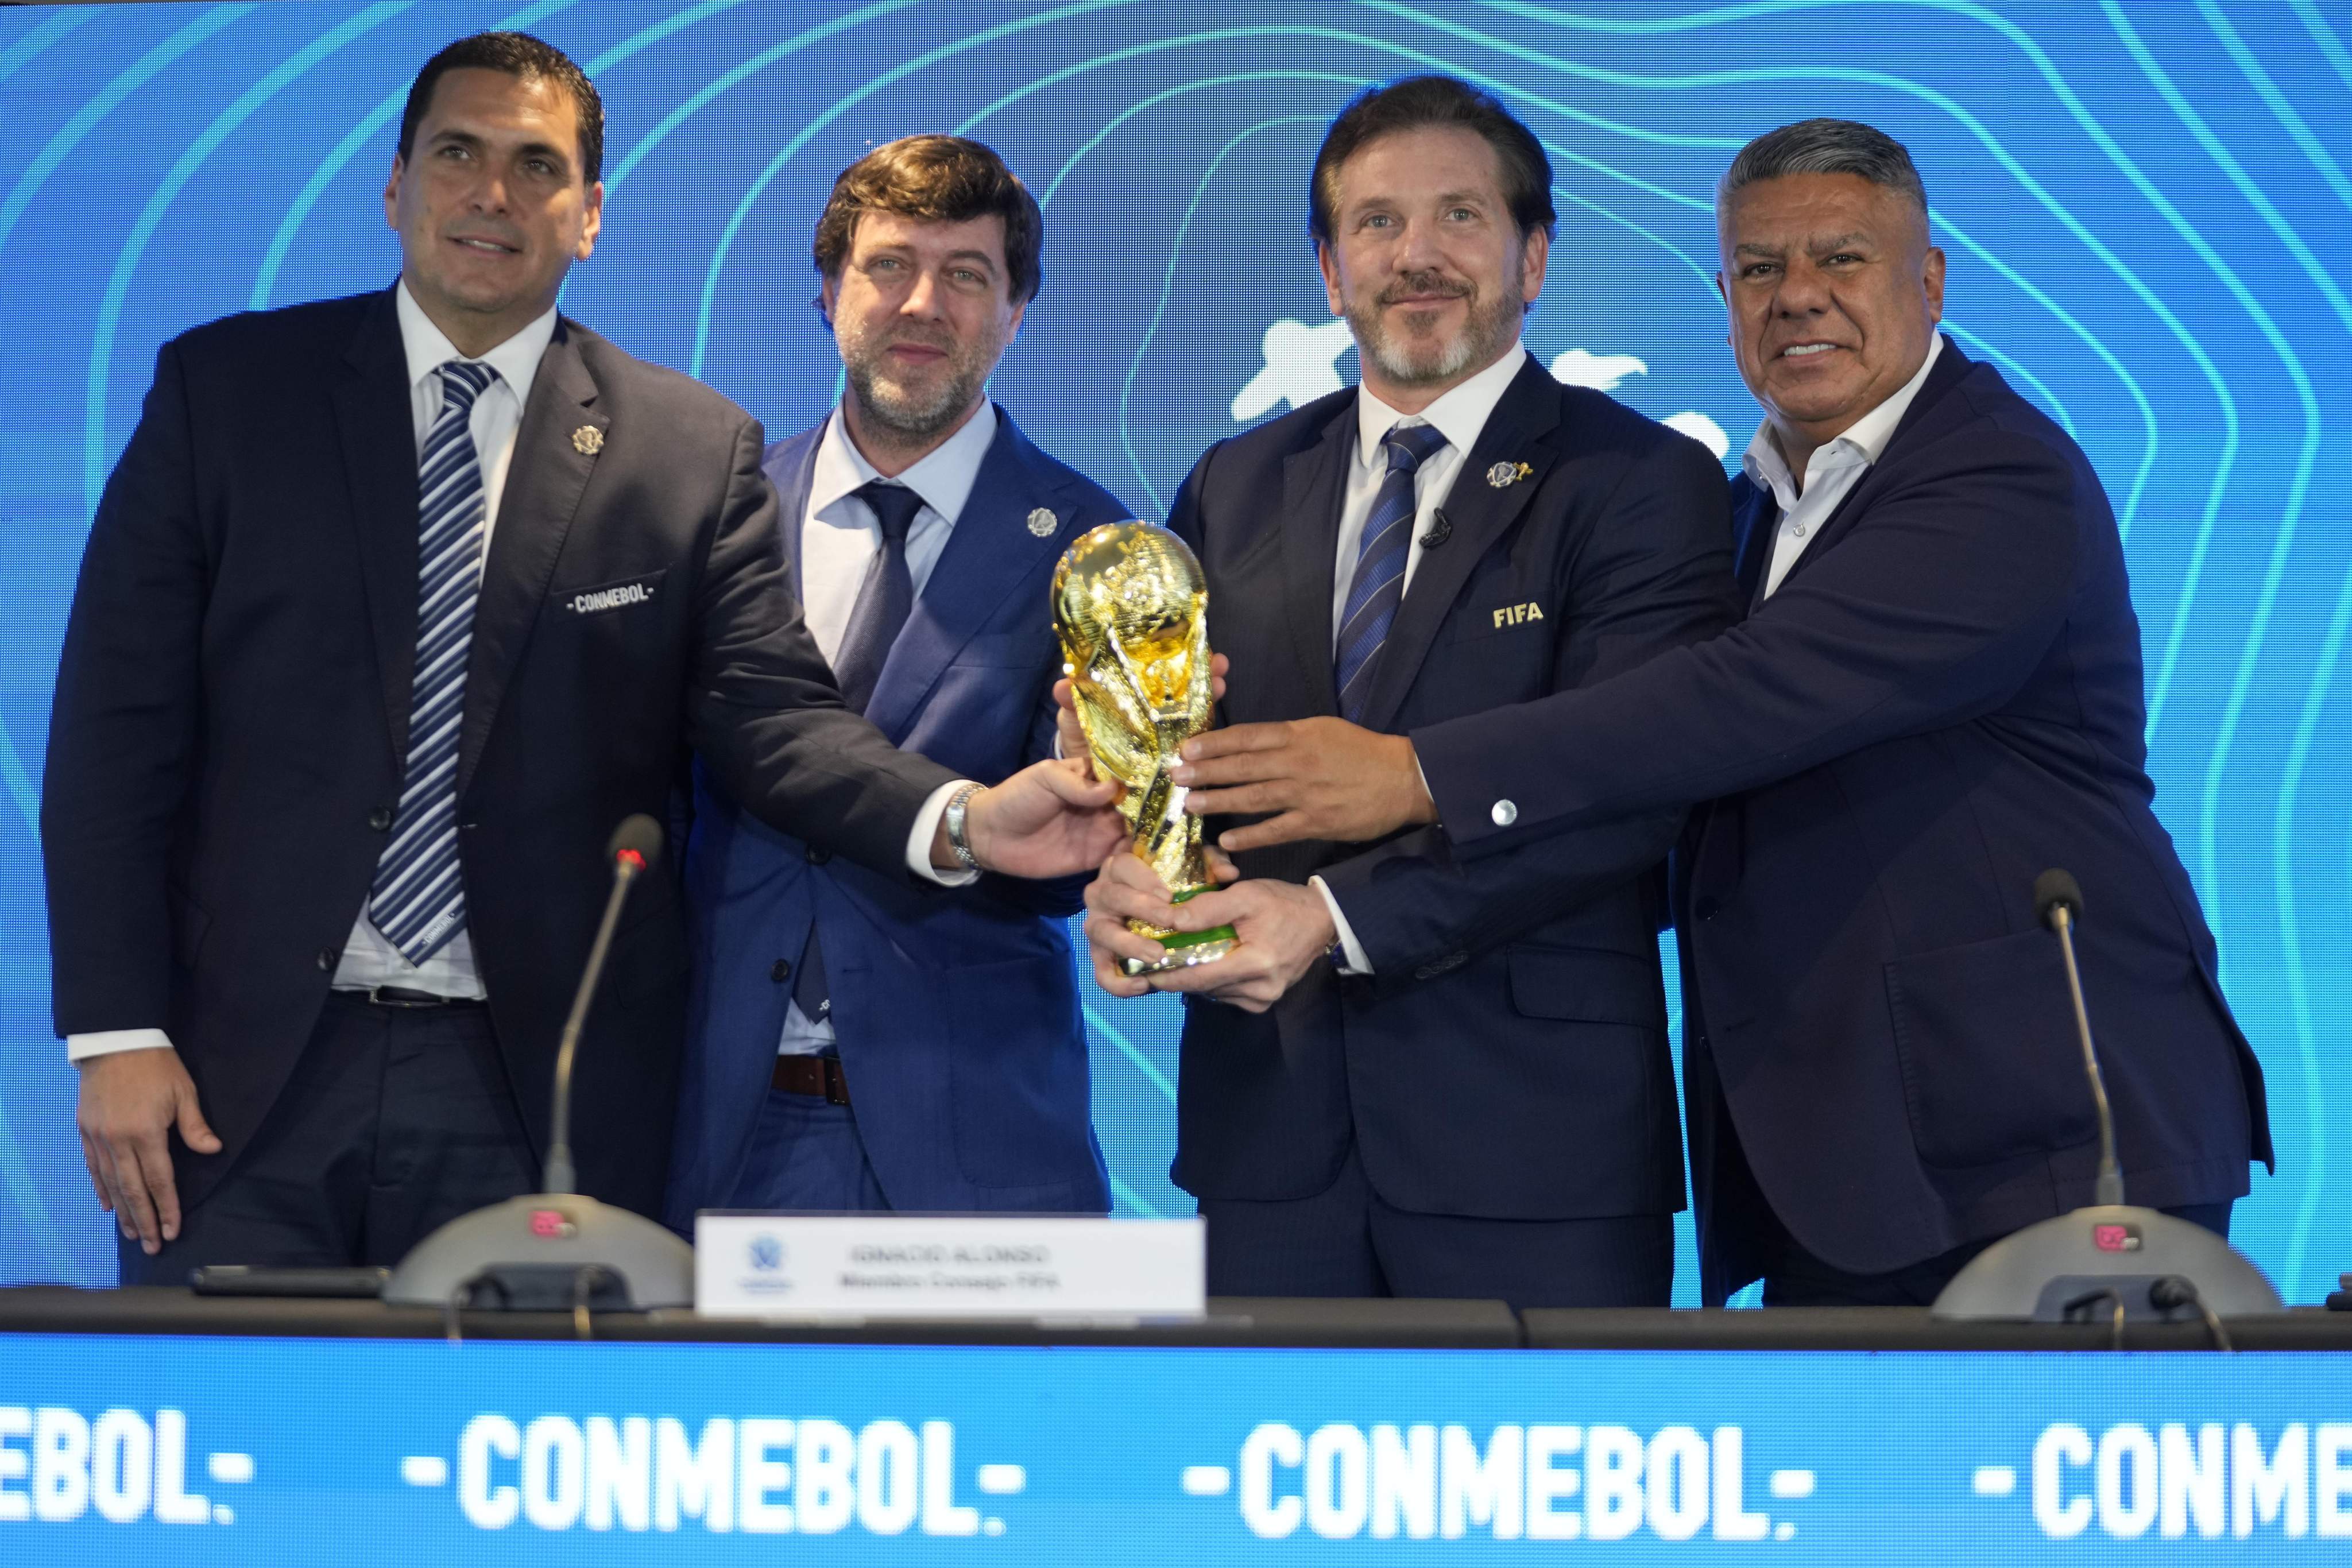 (From left) Paraguay’s Soccer Association President Robert Harrison, Fifa delegate Ignacio Alonso, Conmebol President Alejandro Dominguez and Conmebol Vice-President Claudio Tapia hold the World Cup trophy in Luque, Paraguay on Wednesday. Photo: AP